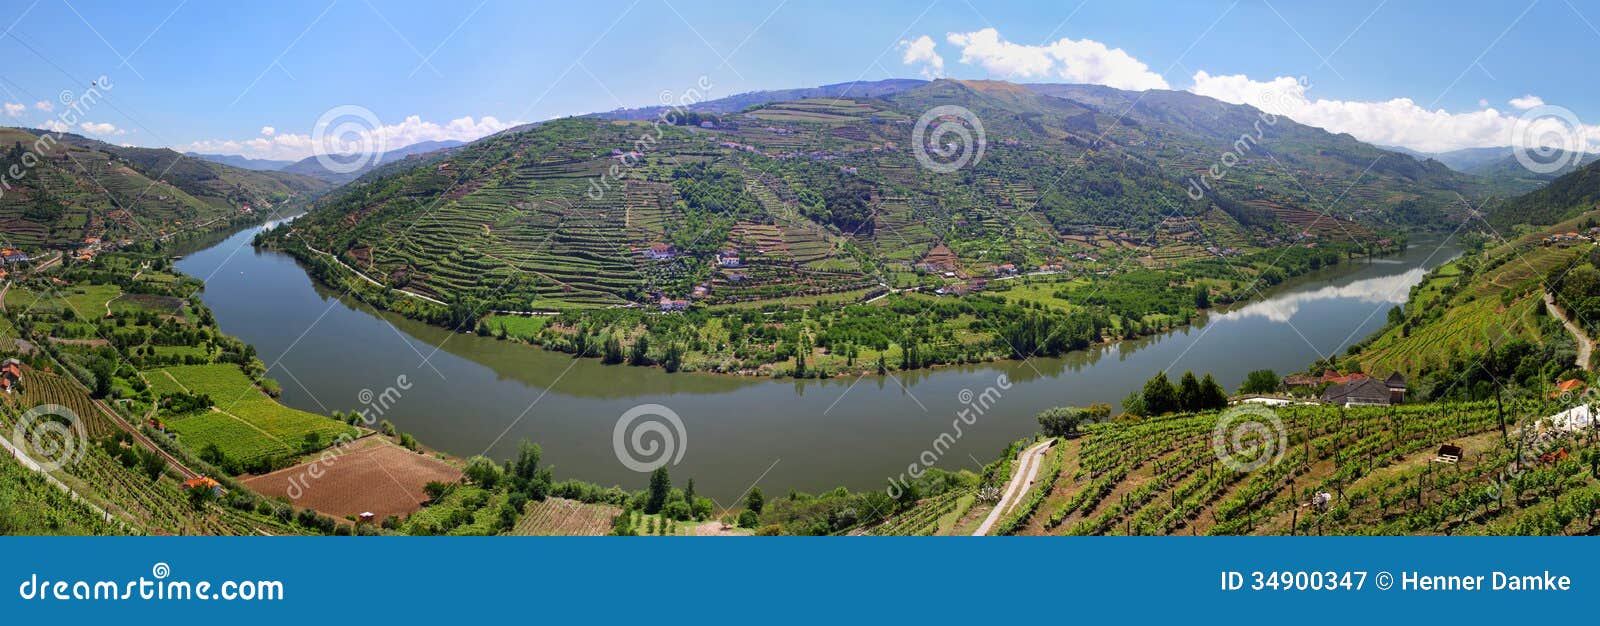 valley of river douro with vineyards near mesao frio portugal